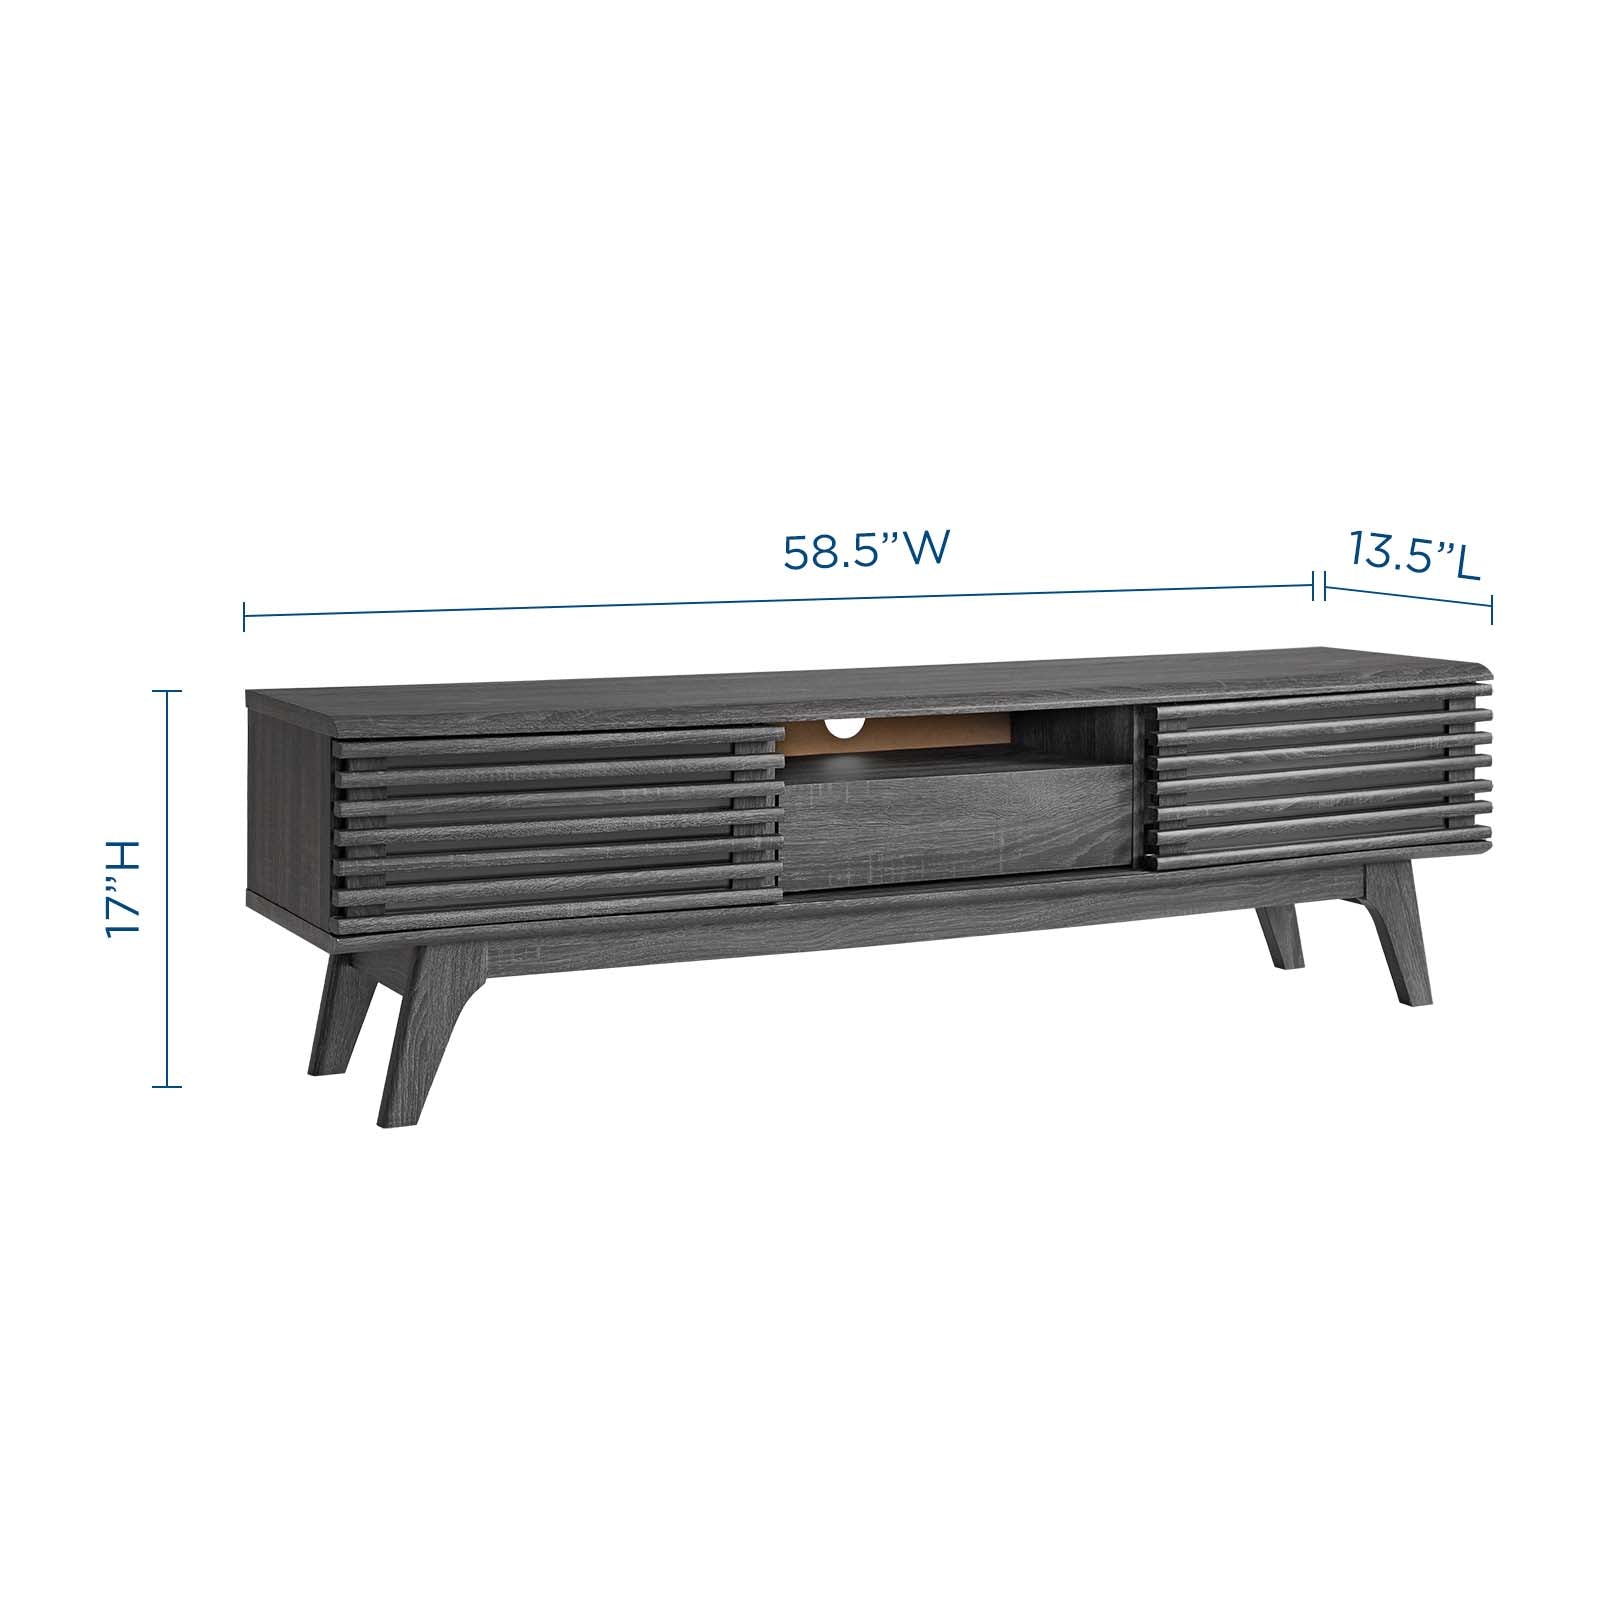 Modway TV & Media Units - Render 59" TV Stand Charcoal